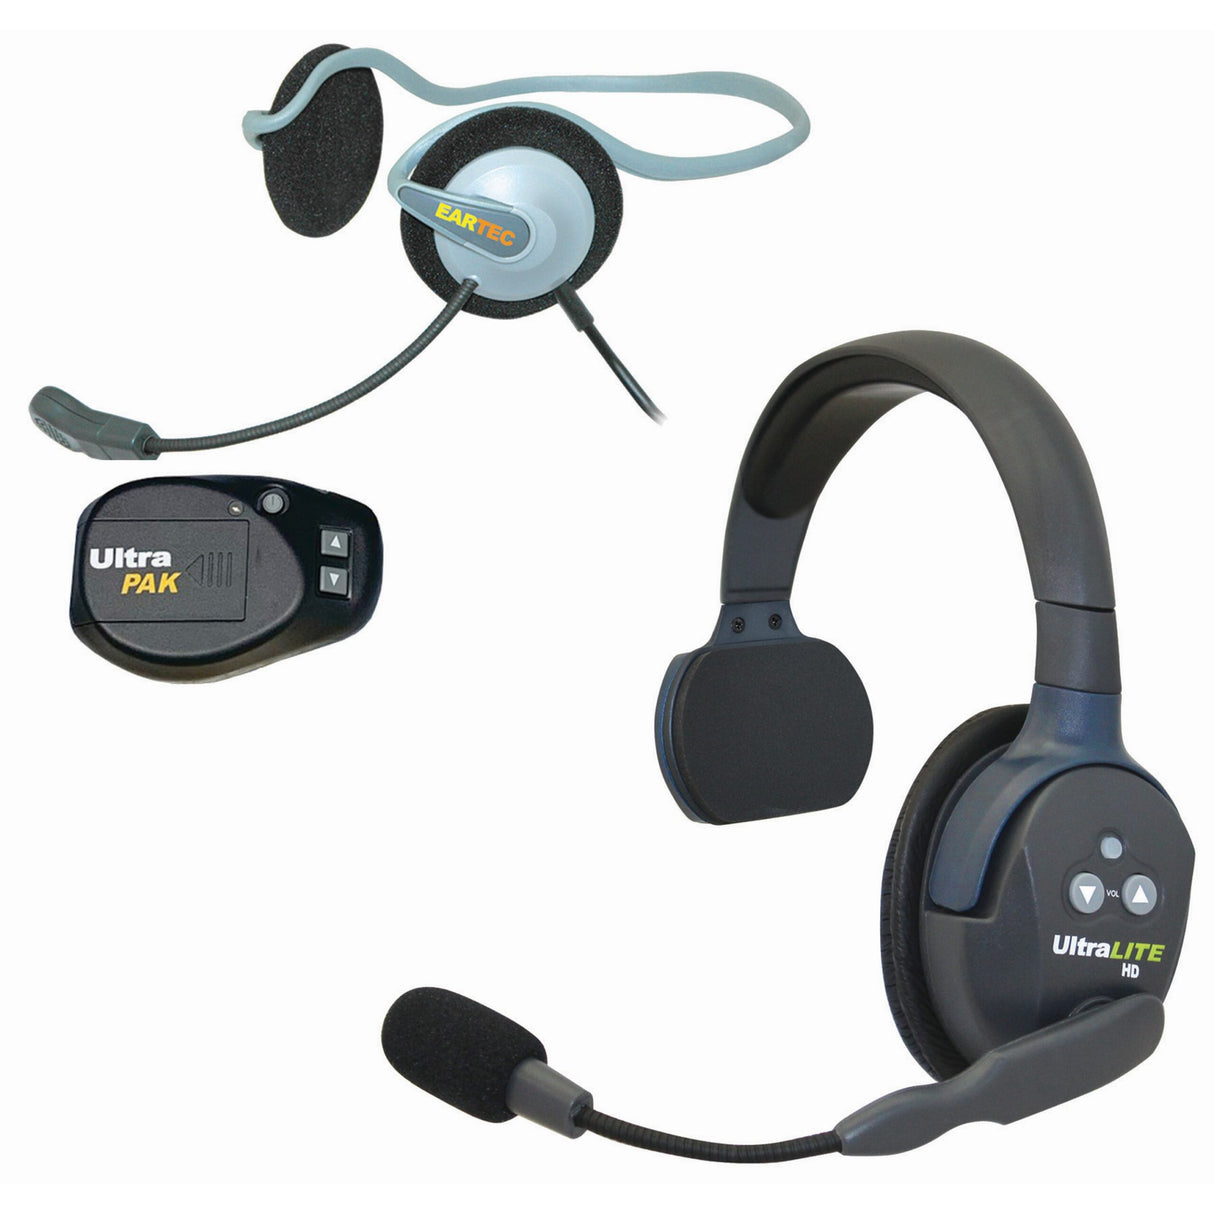 Eartec SMMON3 1 Single MAIN UltraLITE and 2 Monarch/UltraPAK Headsets